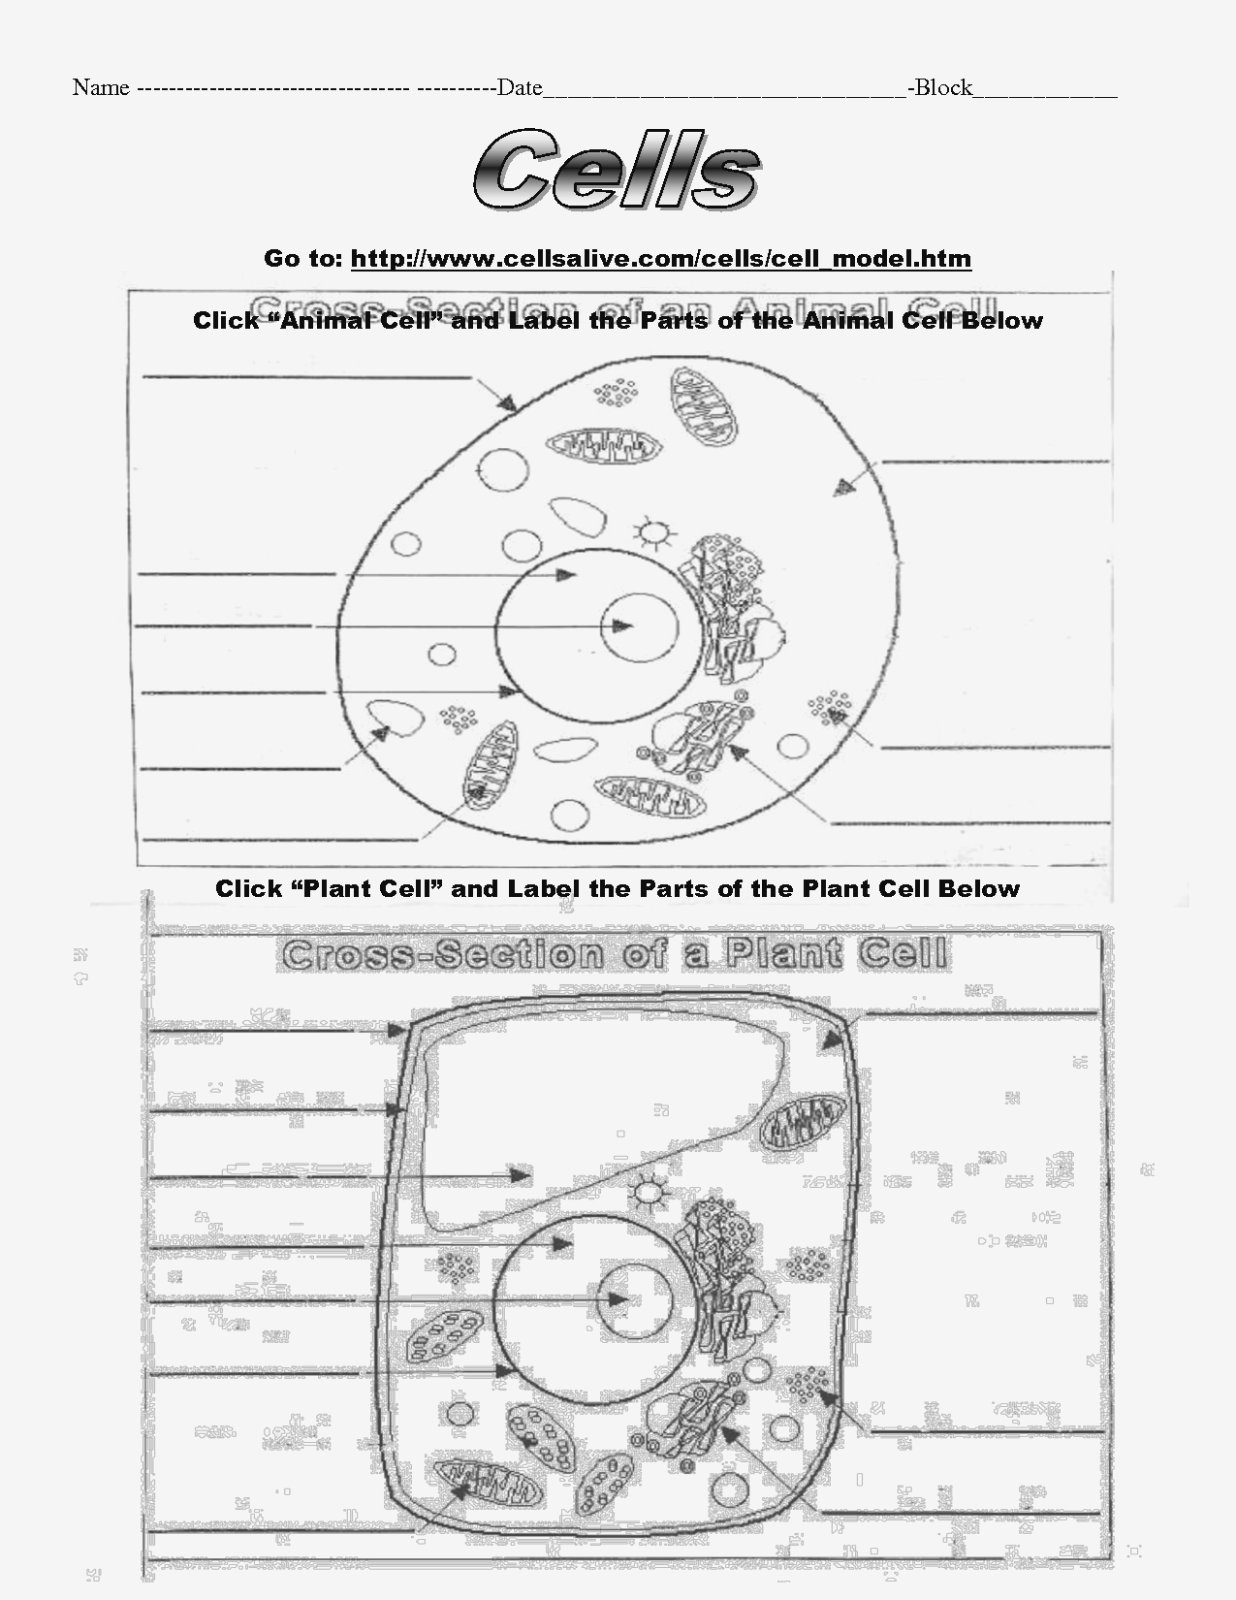 Plant And Animal Cell Coloring Worksheets Beautiful Mean Median Mode For Comparing Plant And Animal Cells Worksheet